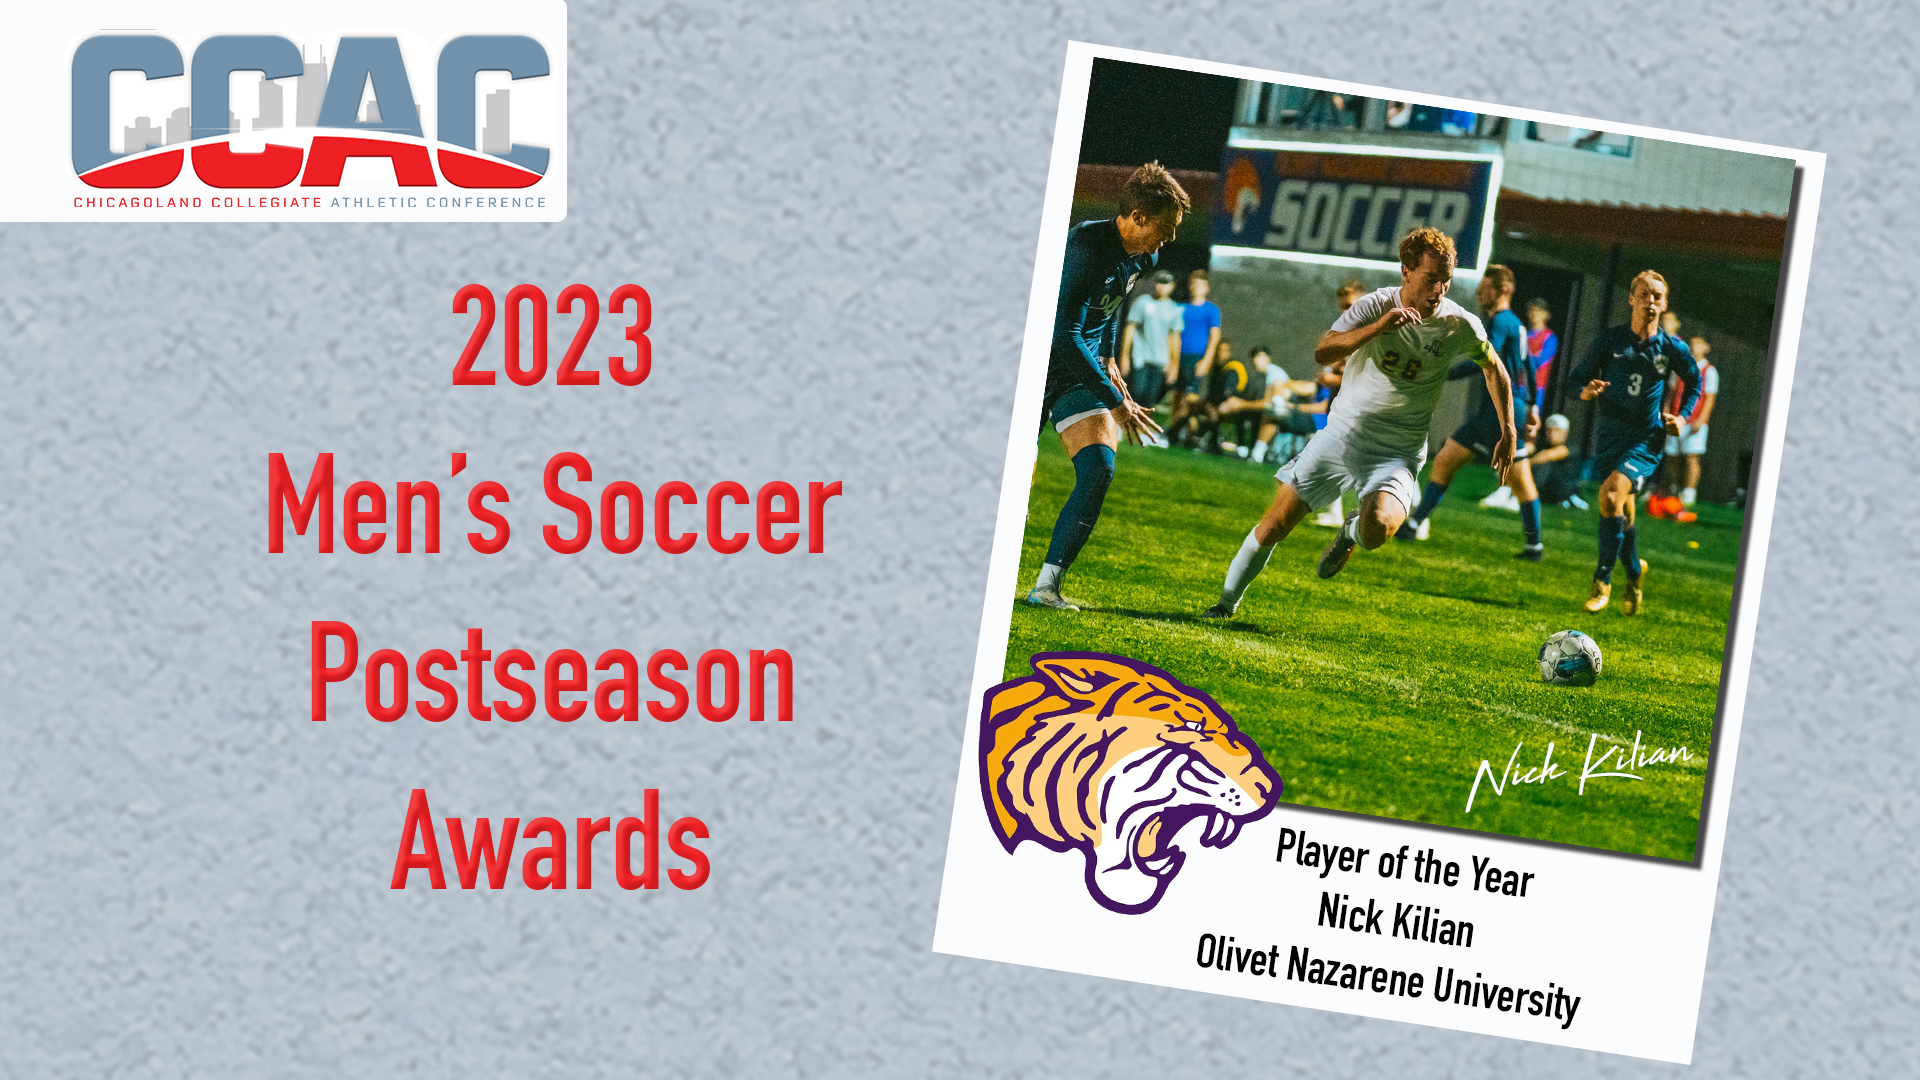 Olivet Nazarene Completes The Trifecta By Topping Men's Soccer Honor Roll